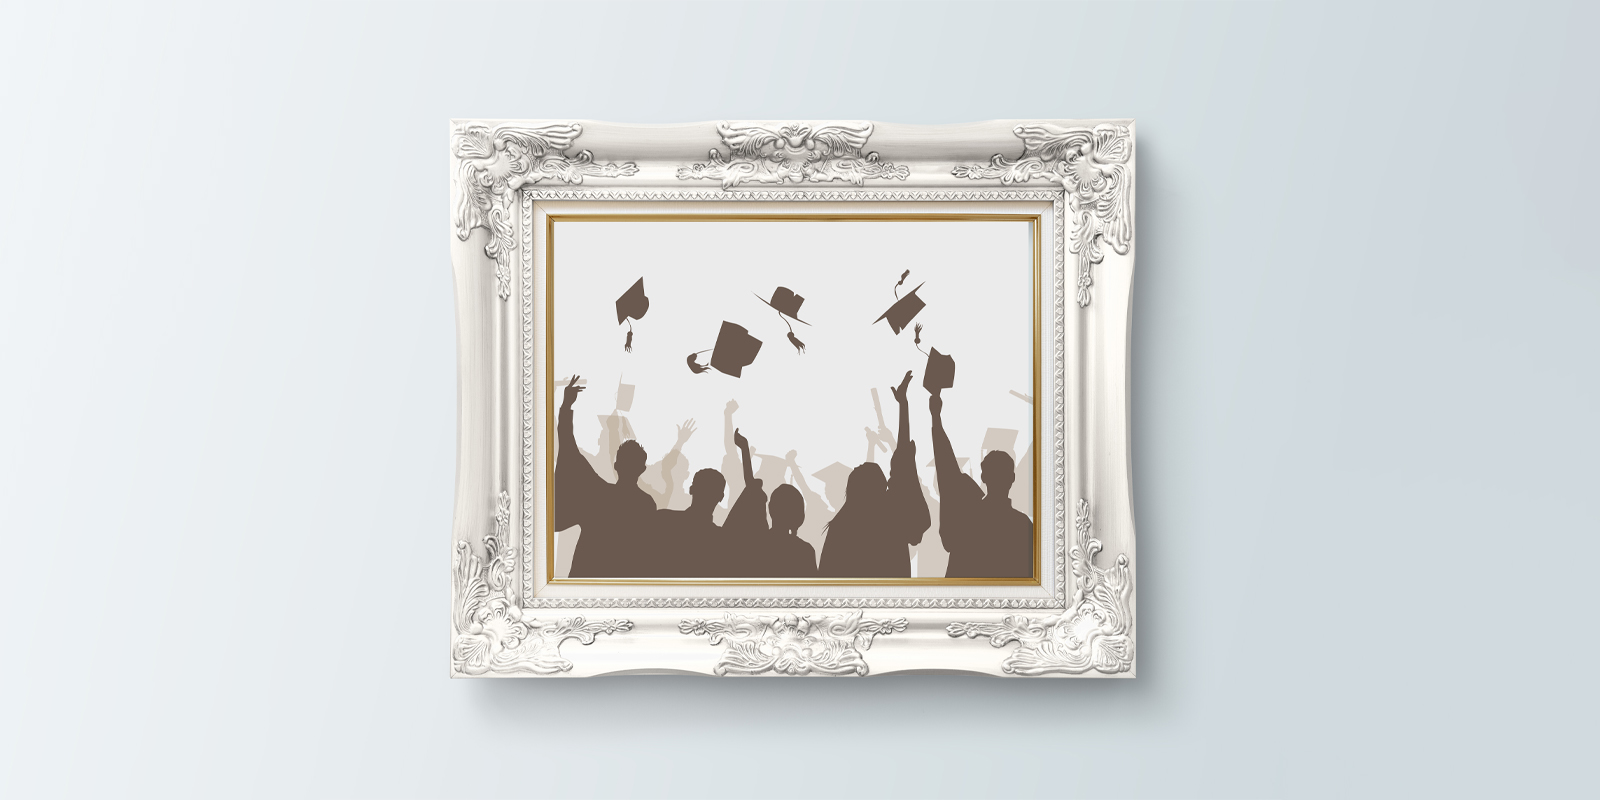 Graduation prints in Geelong - Print with Pagerr